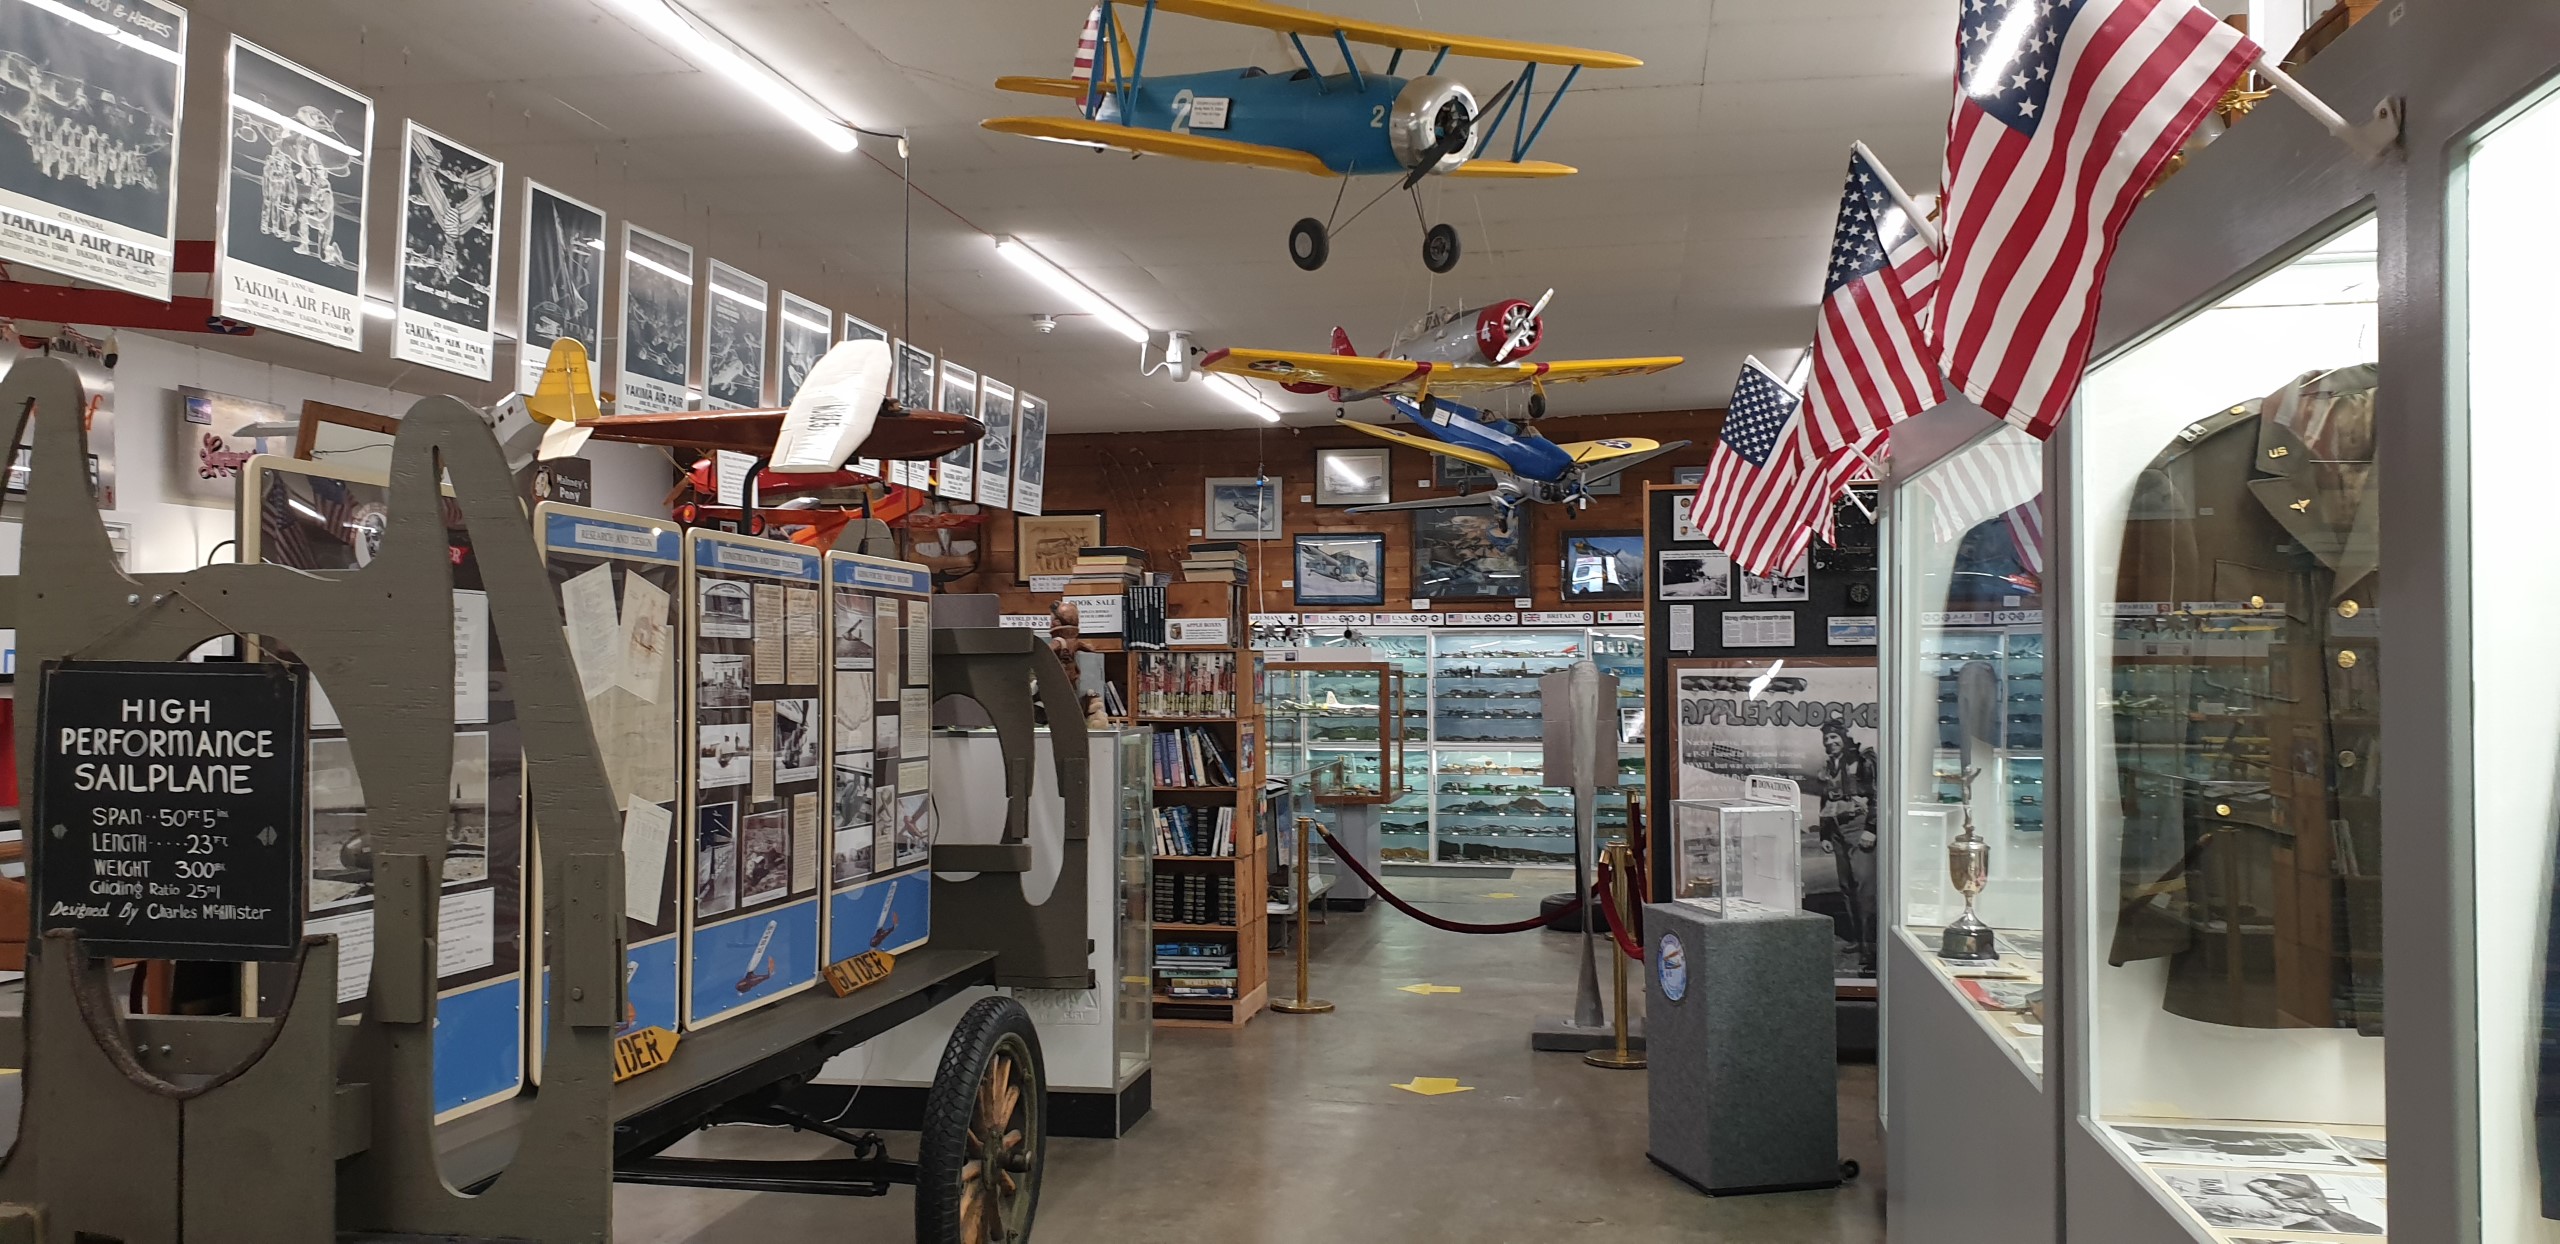 image from McAllister Museum of Aviation